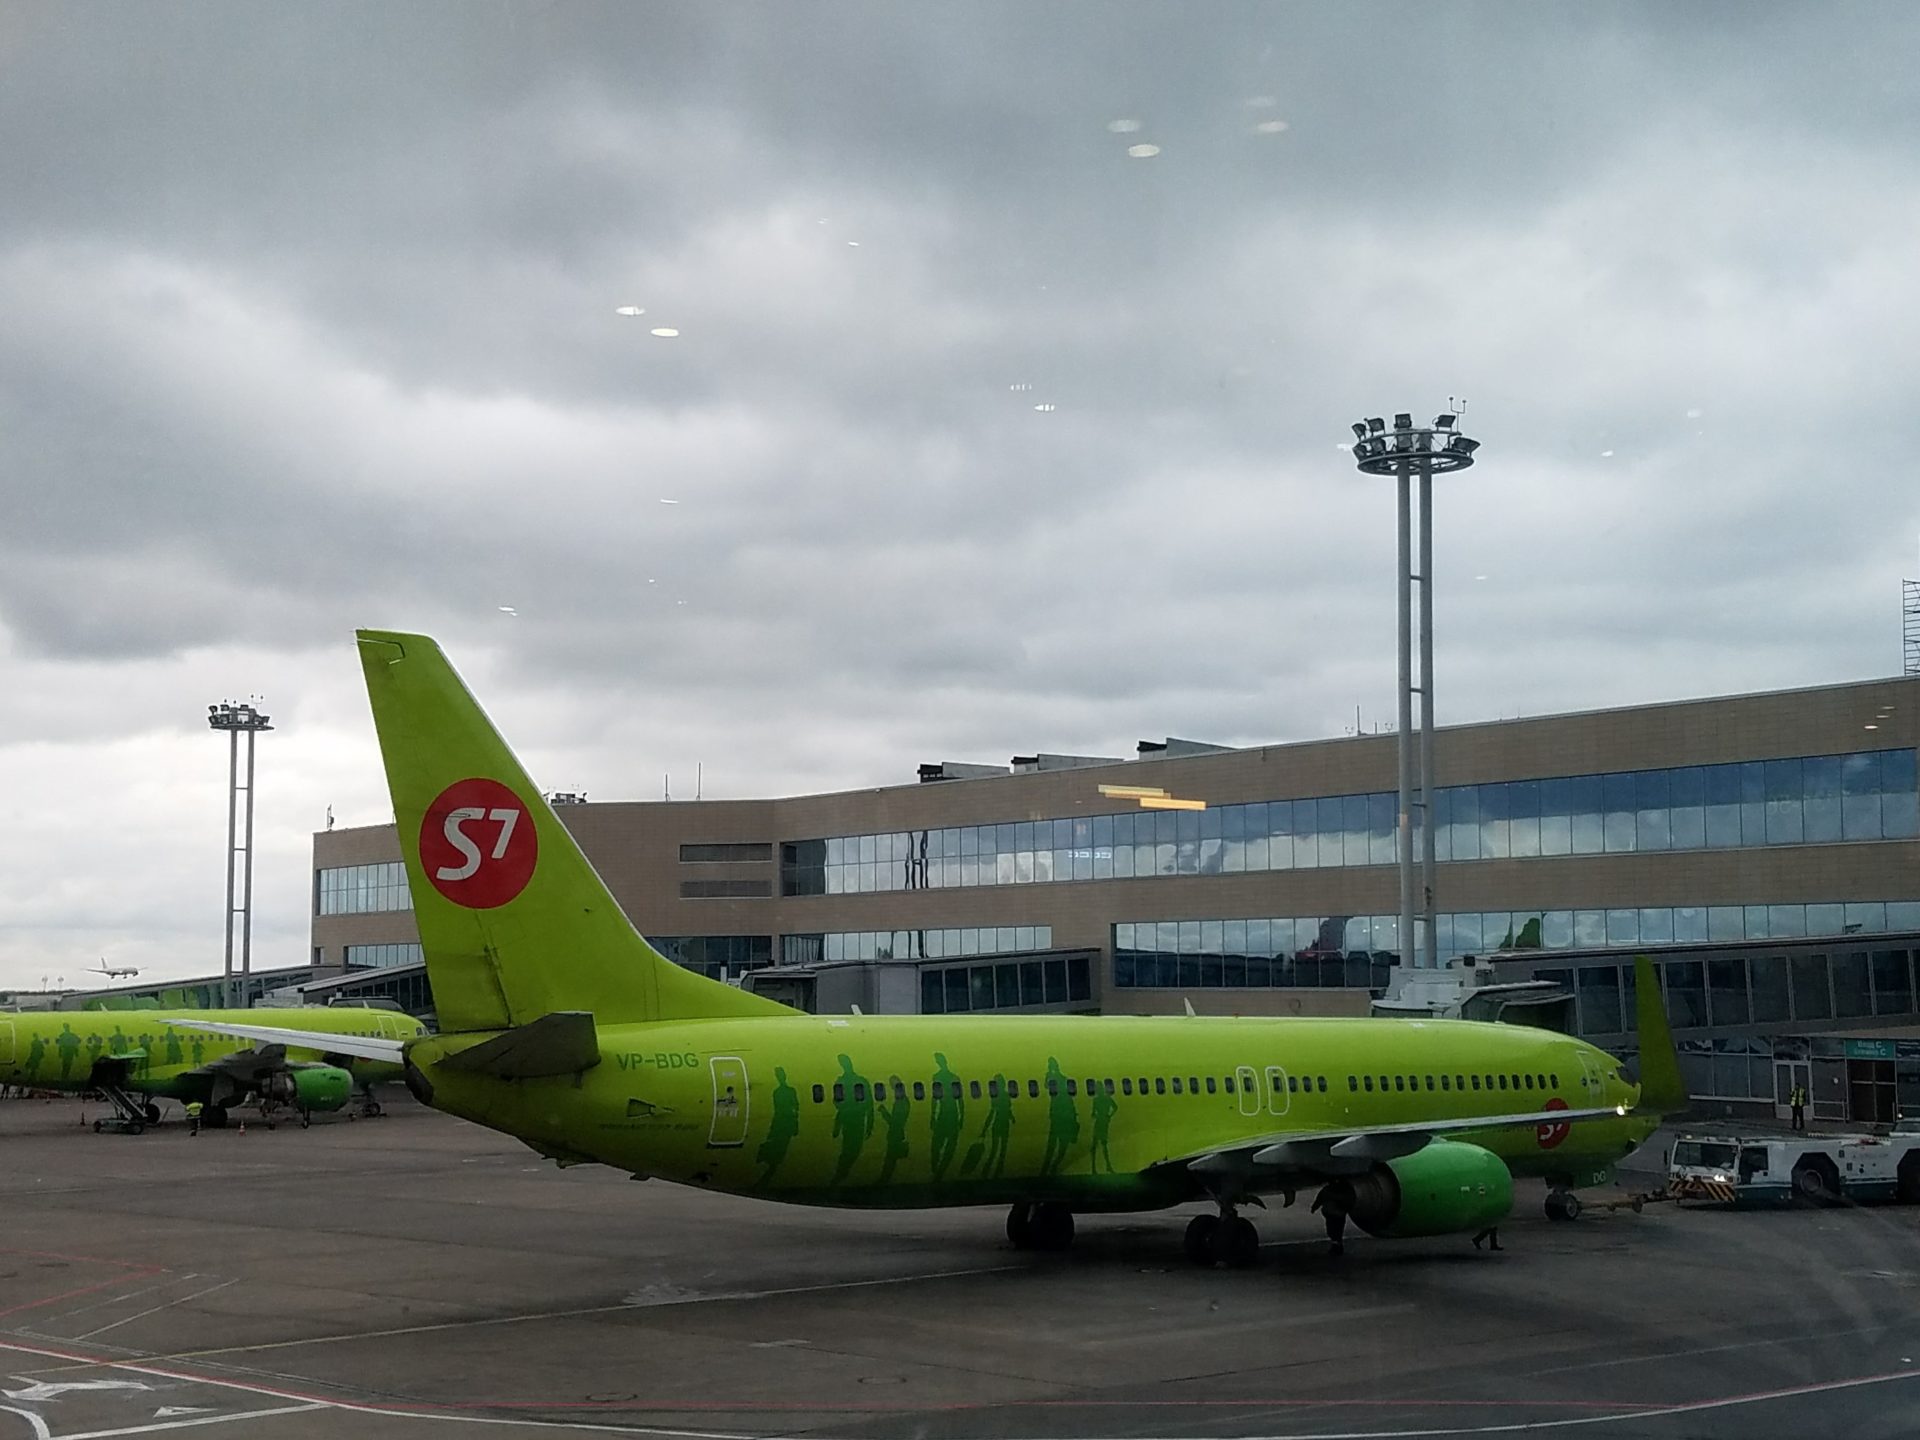 a green airplane on the tarmac